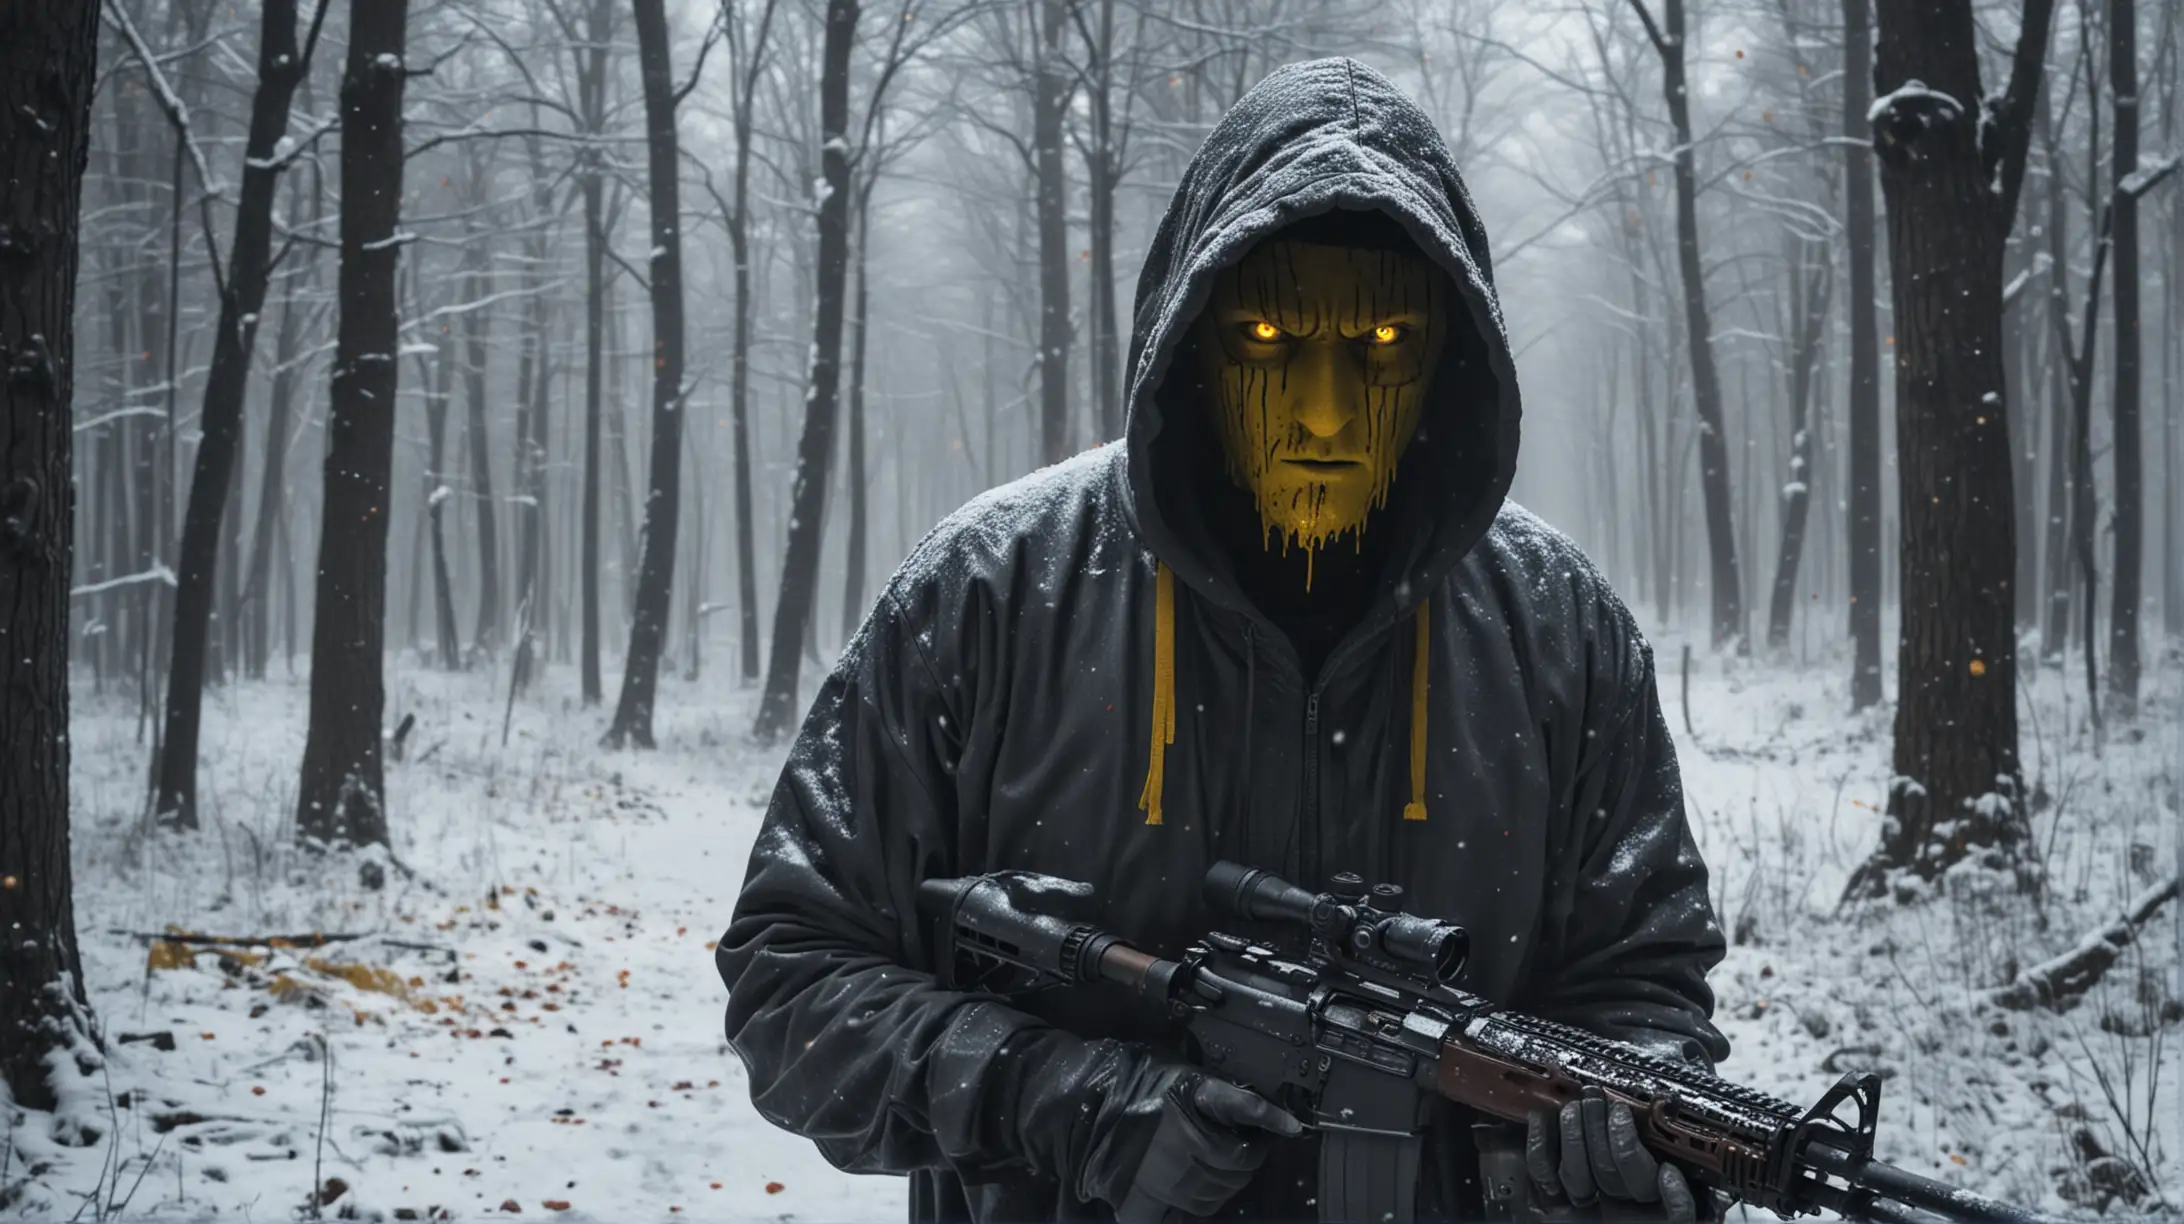 Mysterious Figure in Hoodie With Rifle Facing Terrifying Creature in Snowy Woods